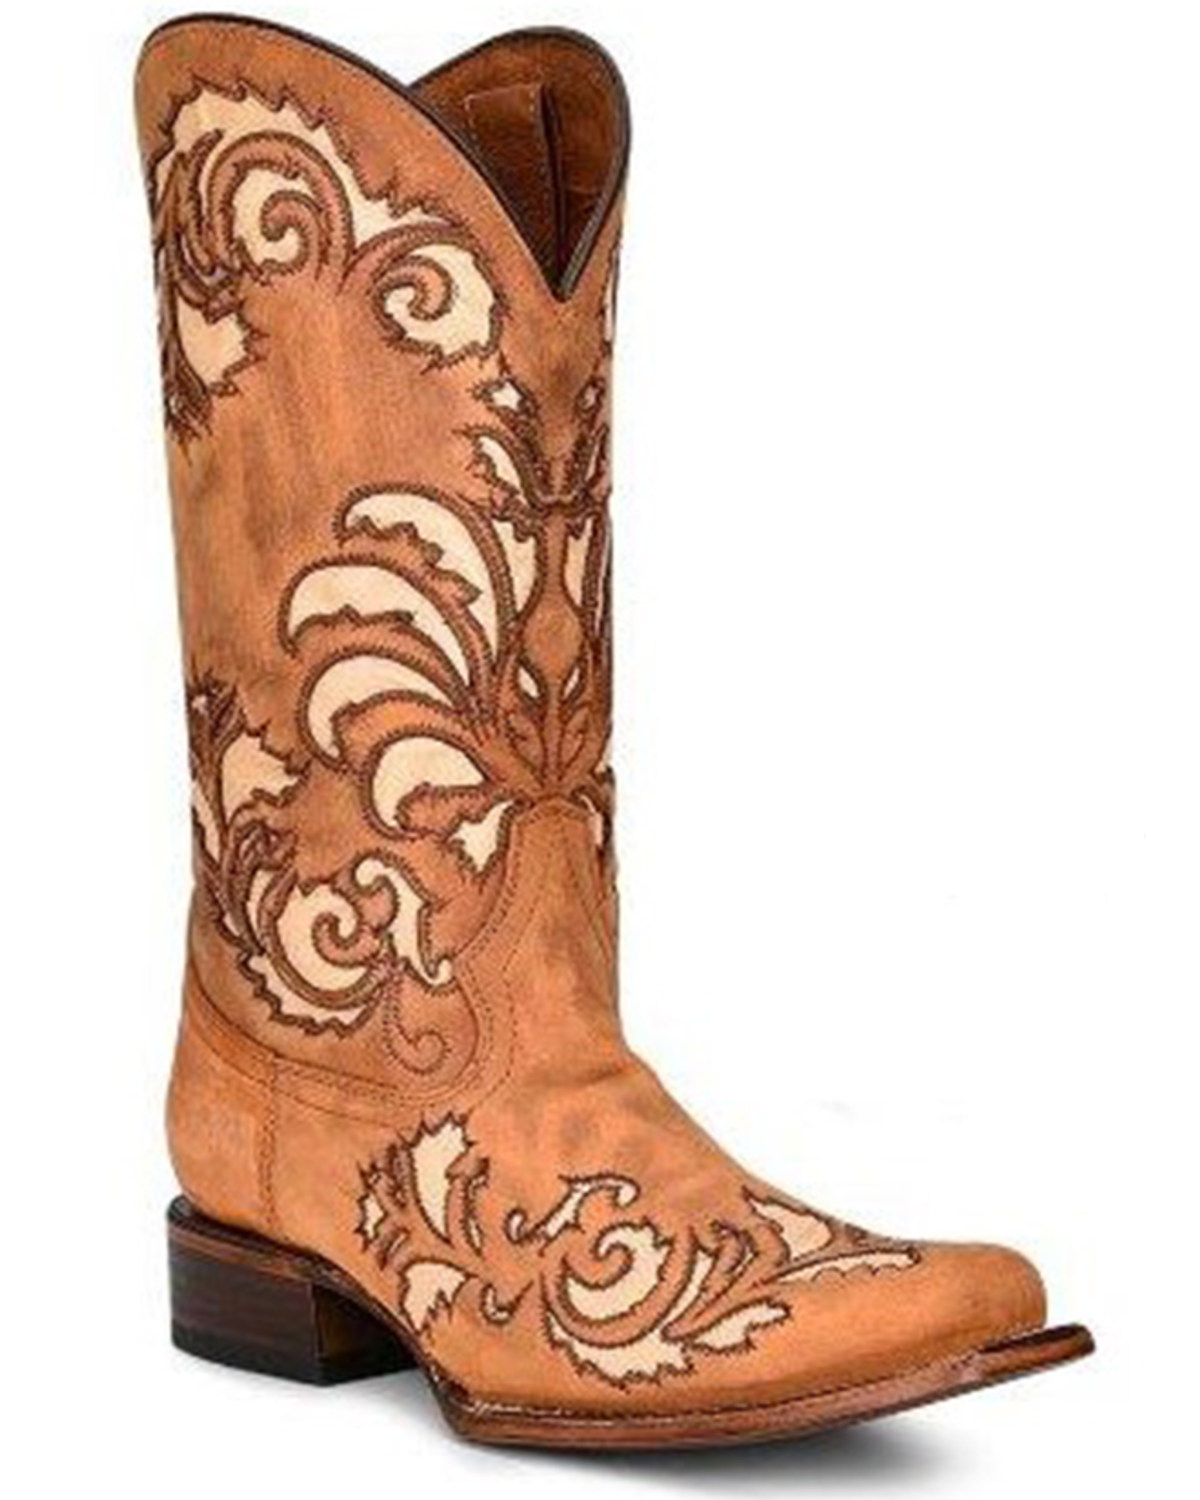 Corral Women's Honey Inlay & Embroidery Tall Western Boots - Square Toe